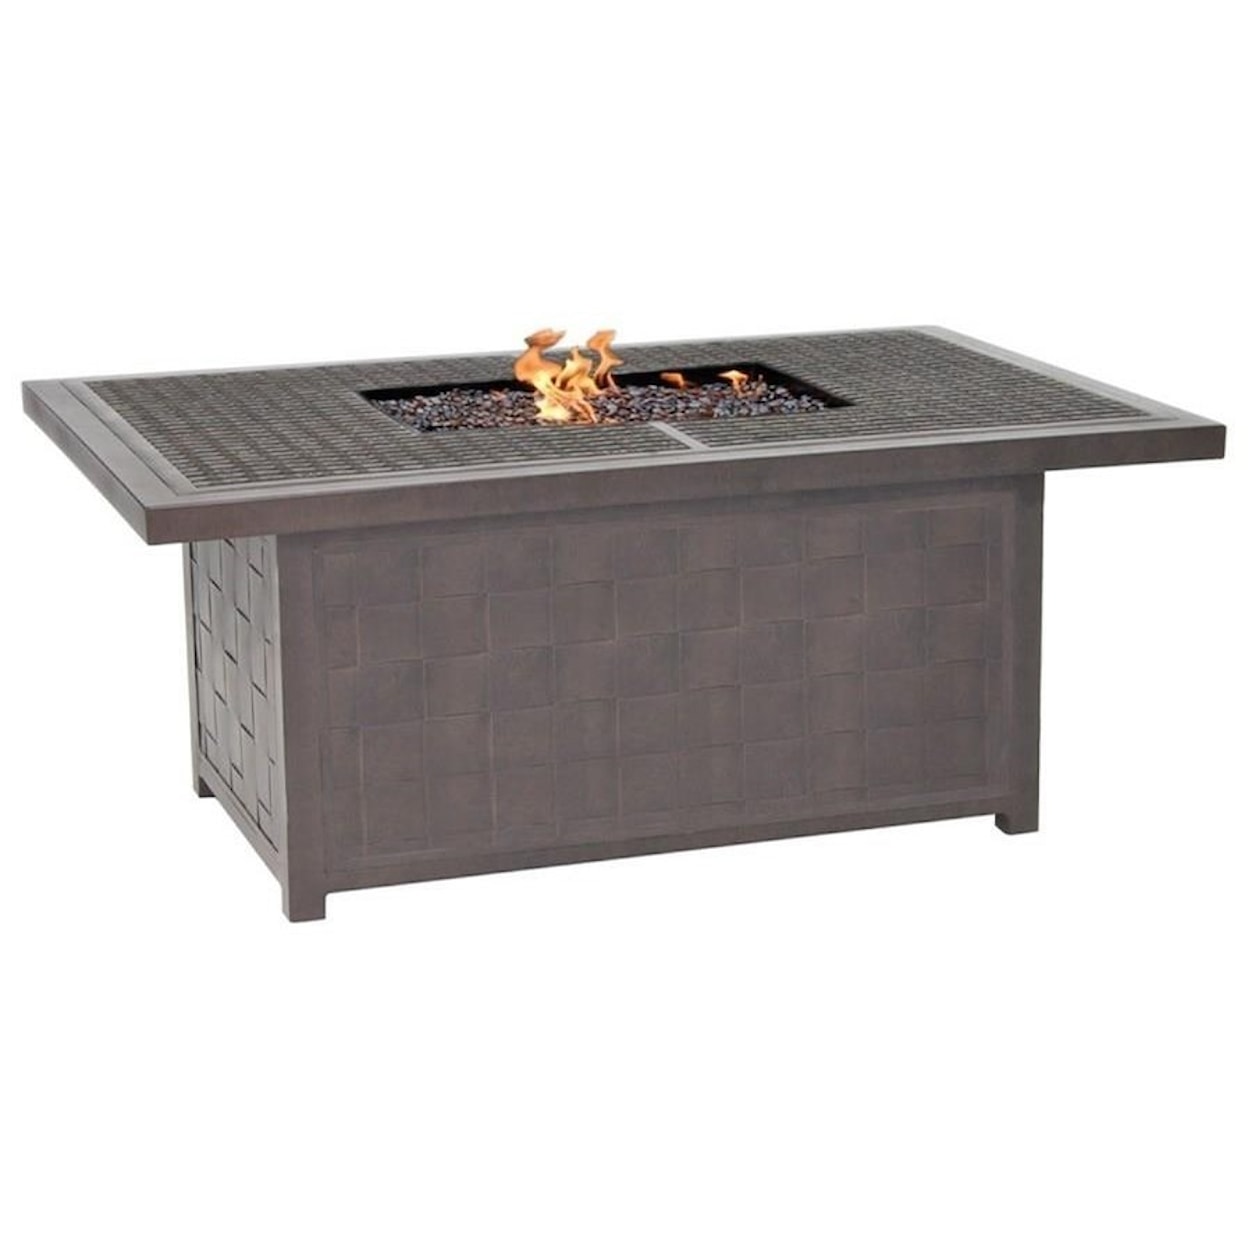 Castelle by Pride Family Brands Classical Firepits Rectangular Coffee Table with Firepit